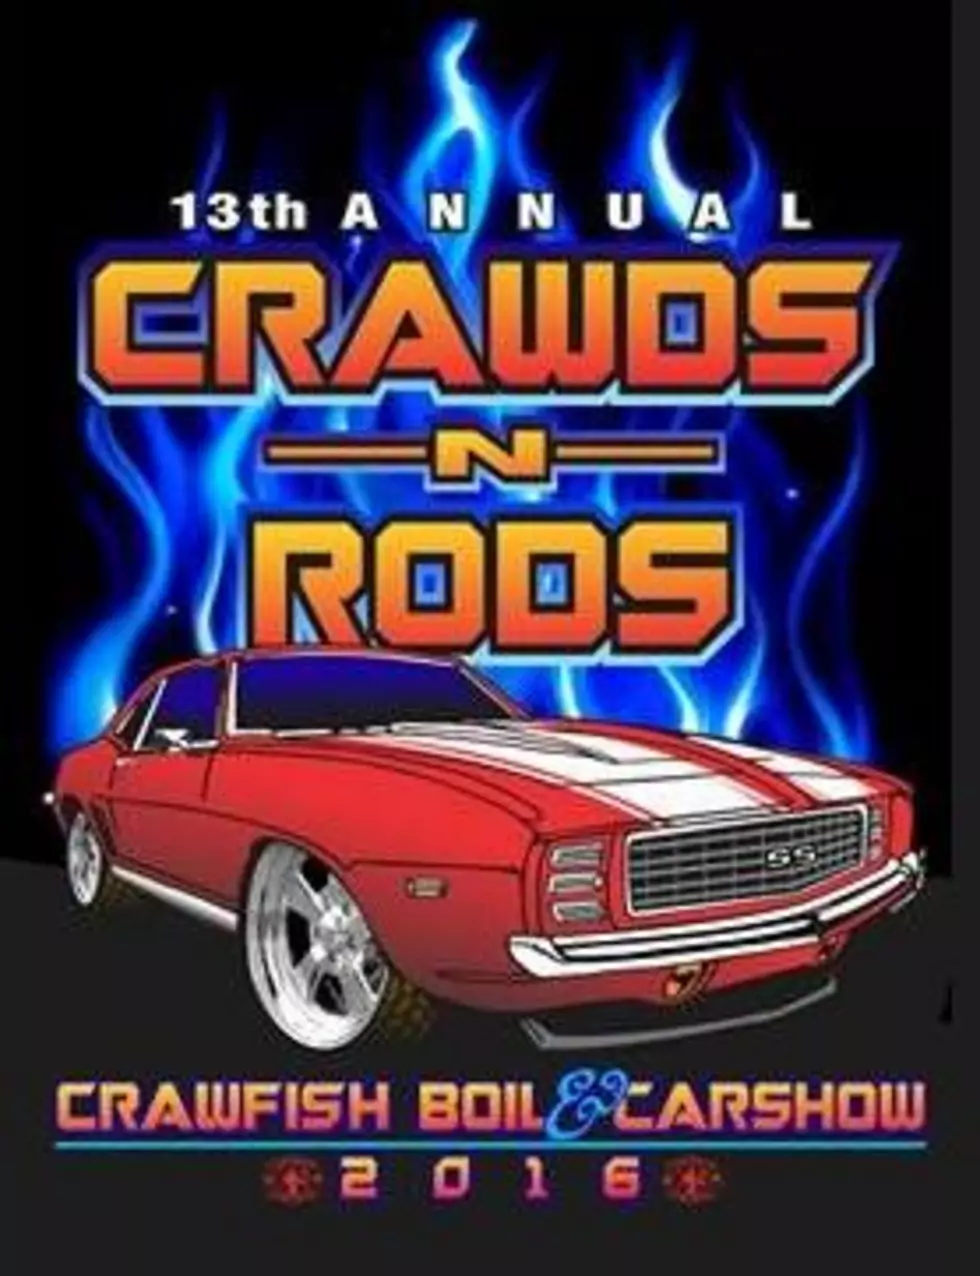 13th Annual Crawds ‘N Rods Car Show and Crawfish Boil